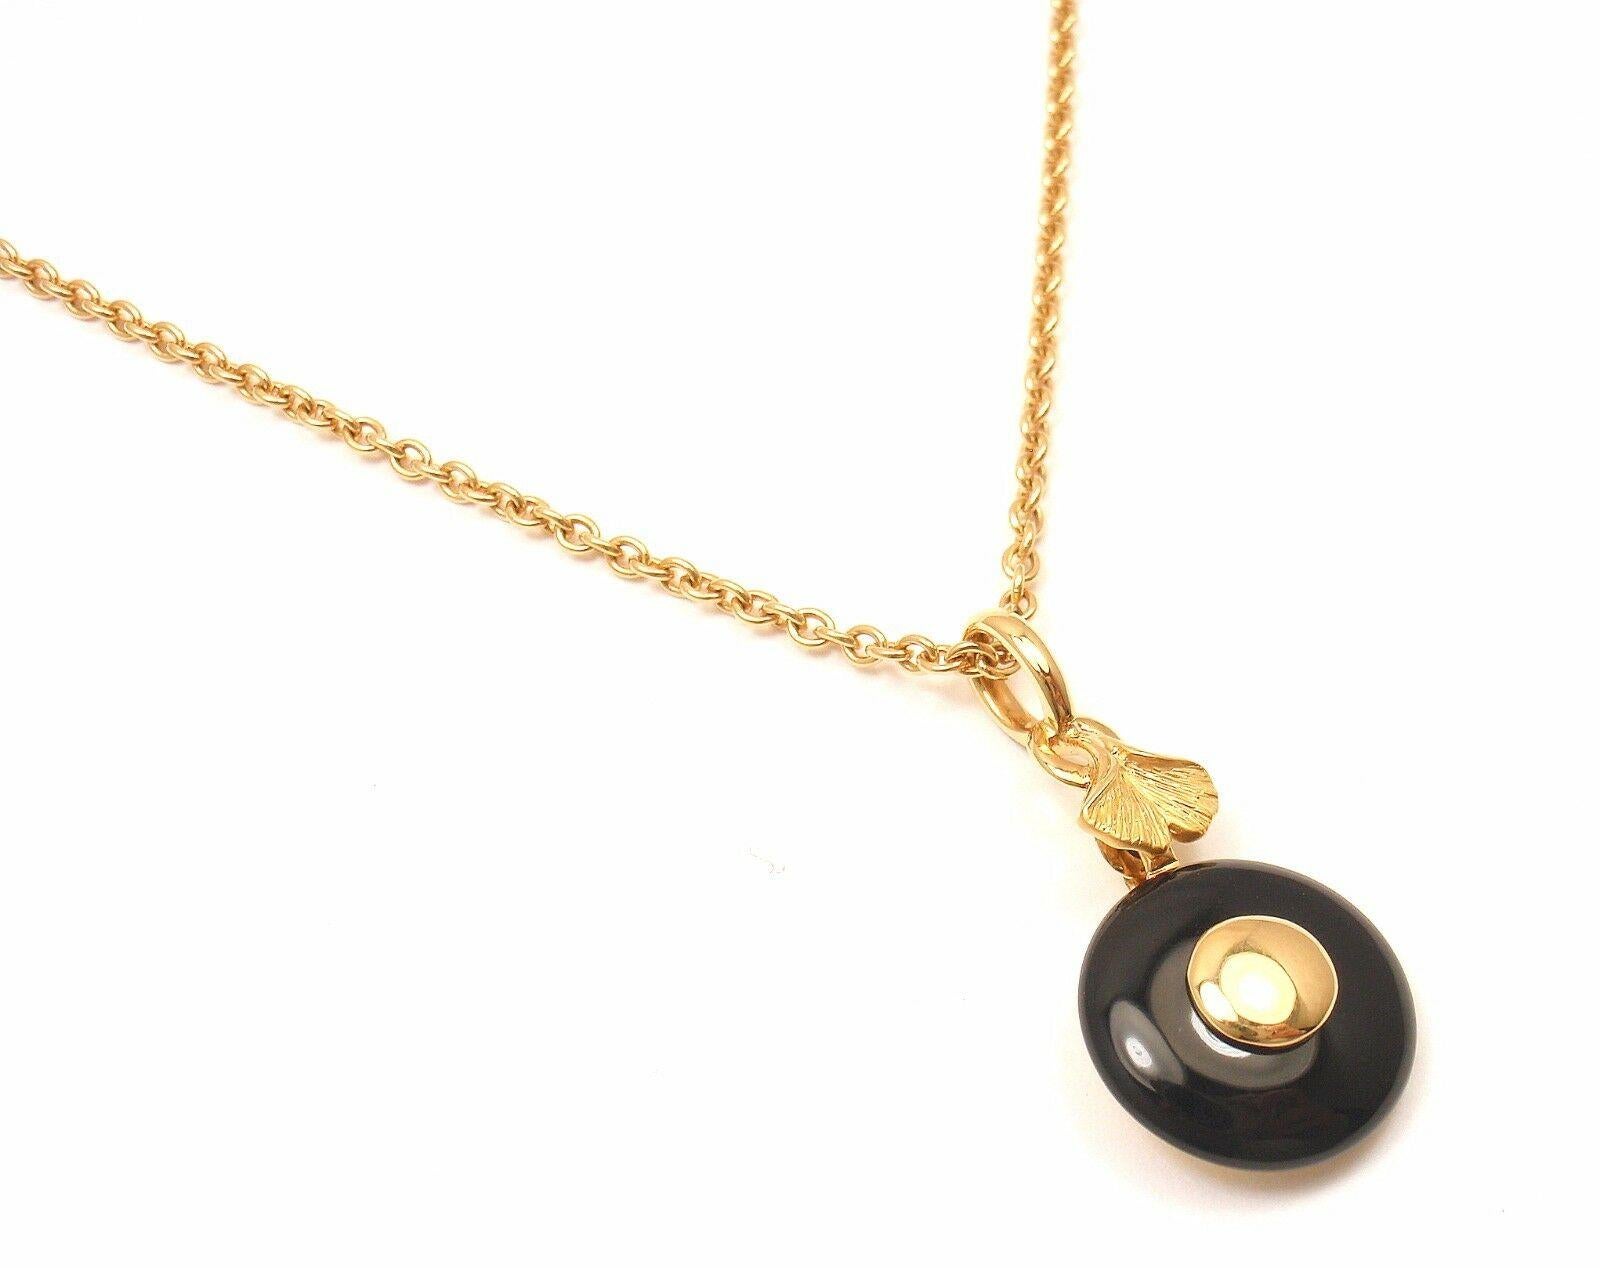 Carrera Y Carrera Ginkgo Black Onyx Yellow Gold Pendant Necklace In Excellent Condition For Sale In Holland, PA